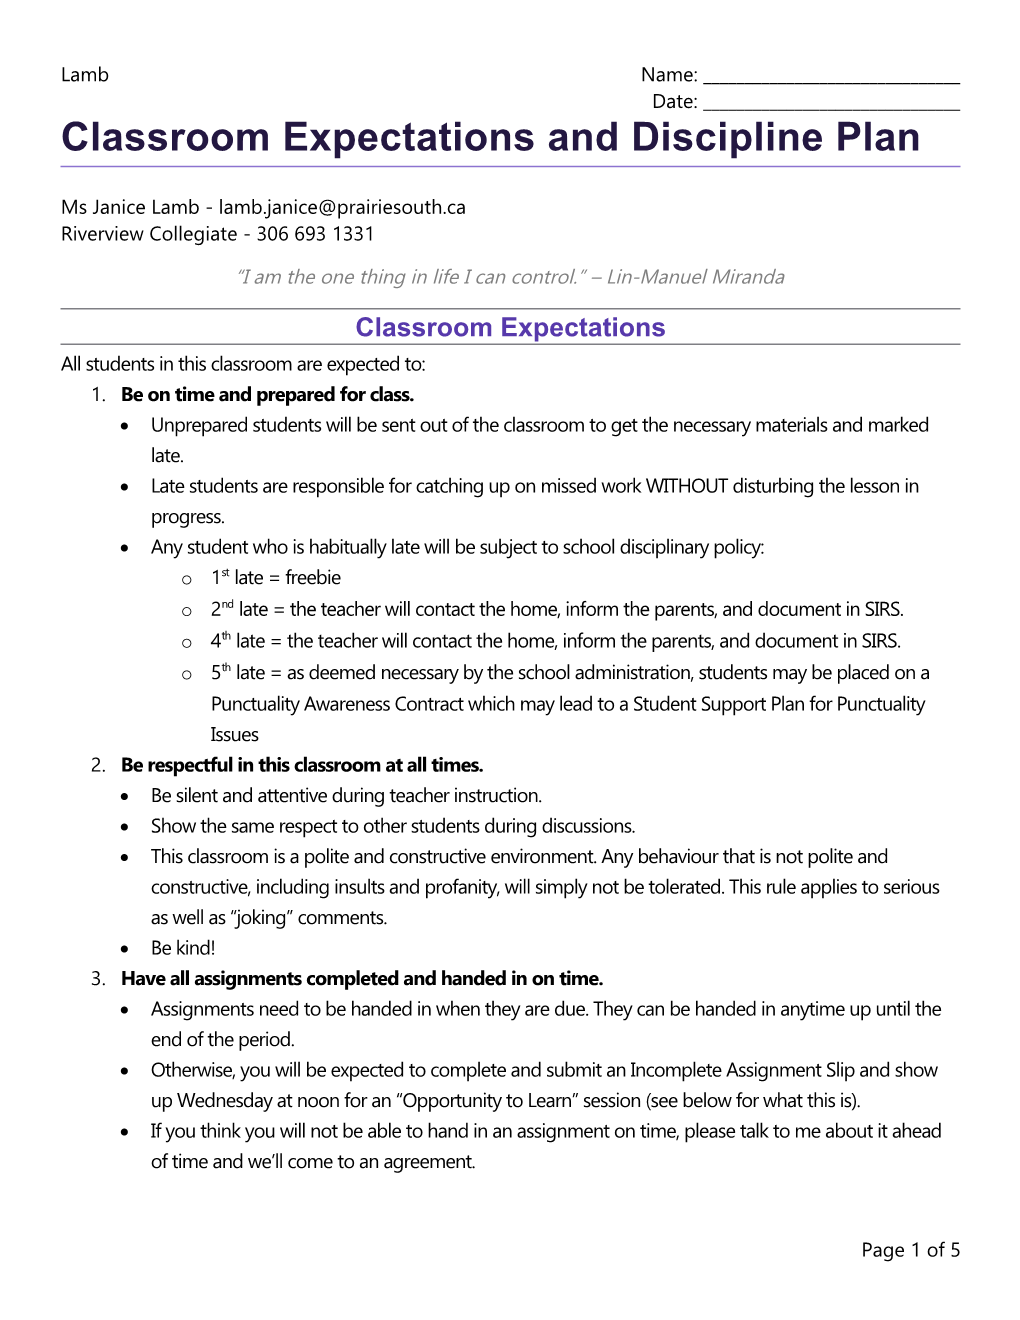 Classroom Expectations and Discipline Plan